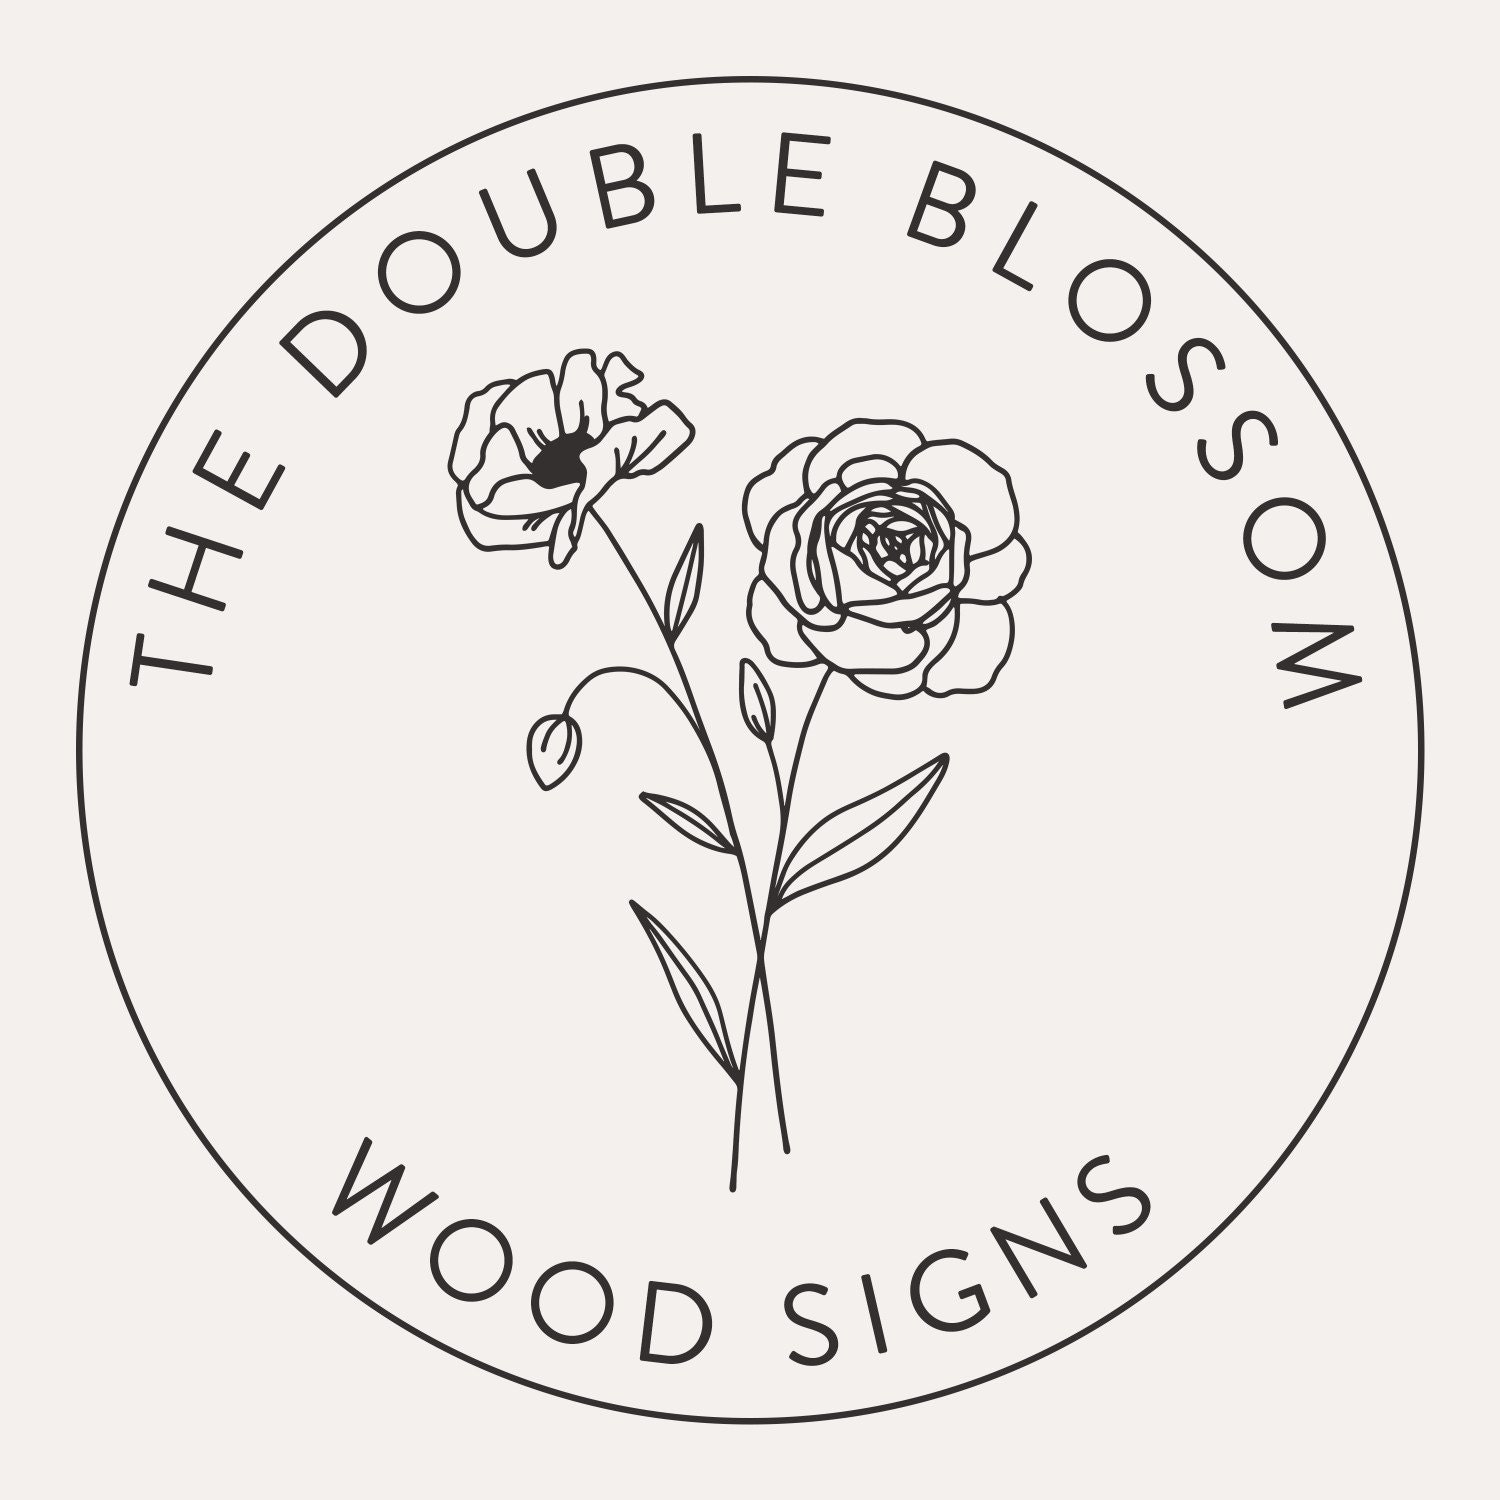 TheDoubleBlossom - Etsy